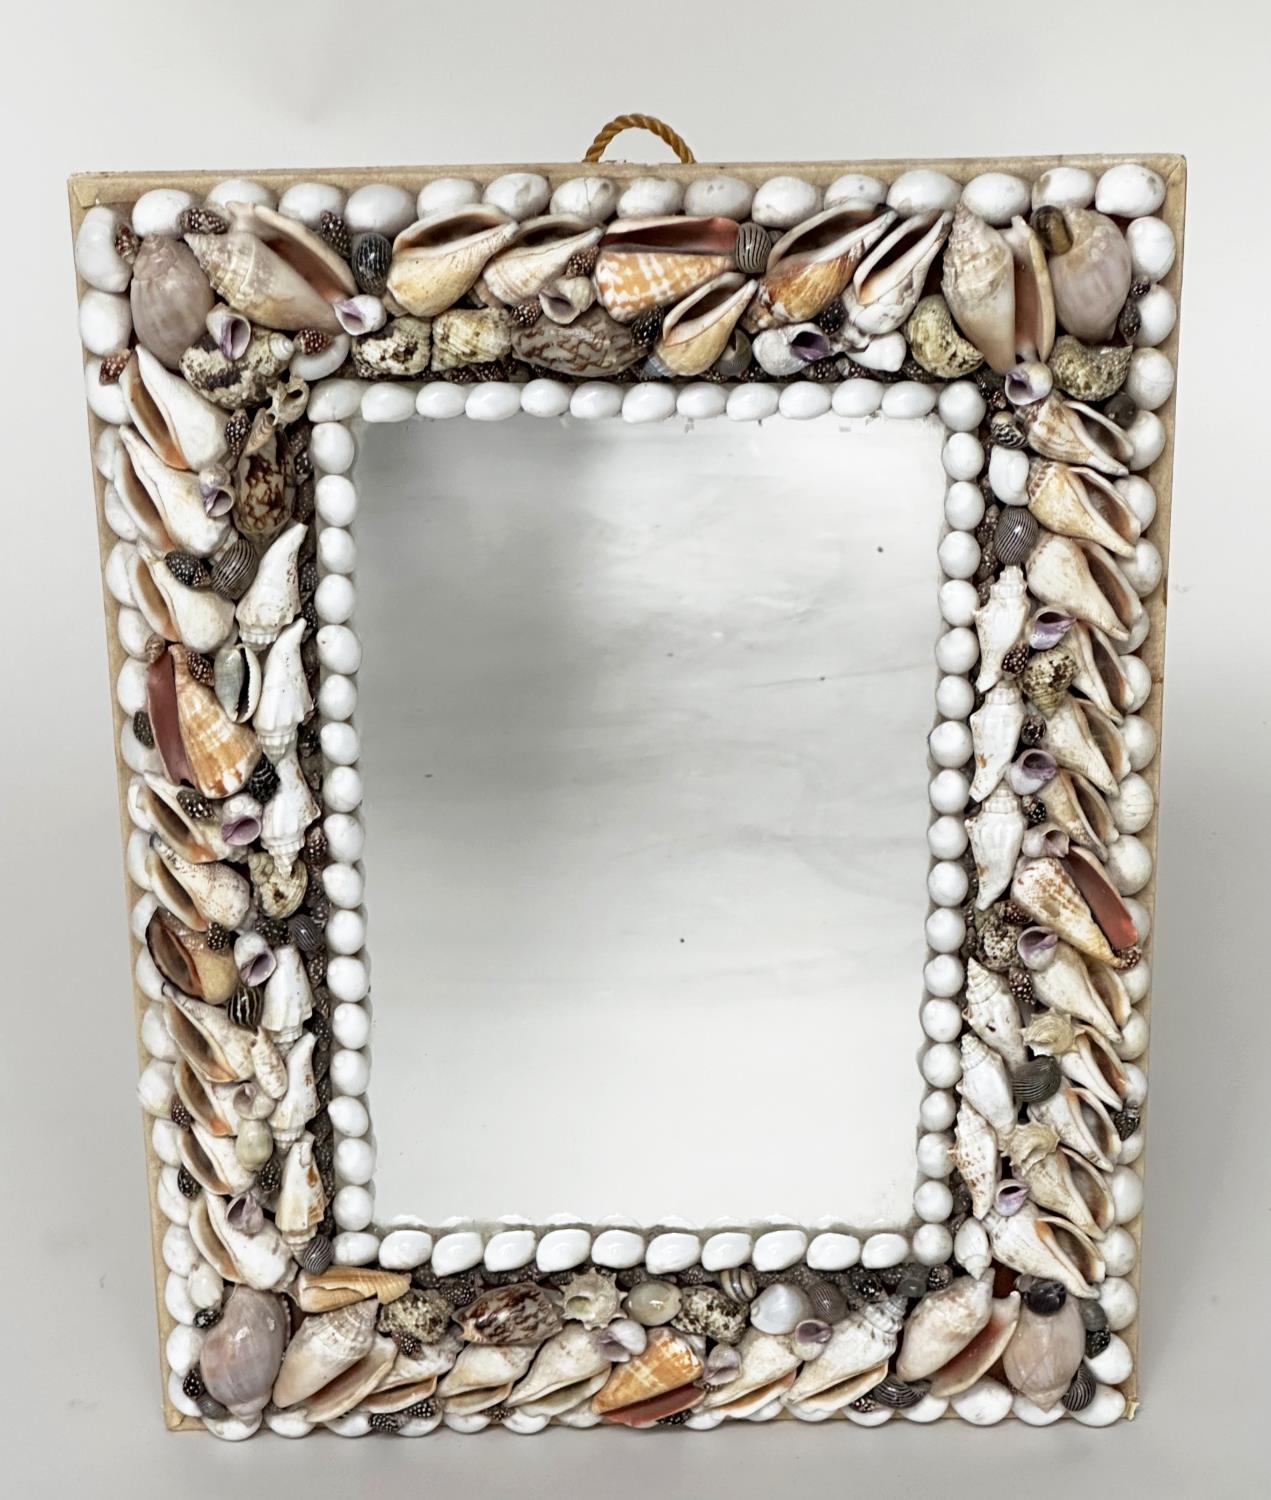 SHELL WALL MIRROR, rectangular natural shell encrusted frame, 43cm x 33cm. - Image 2 of 5